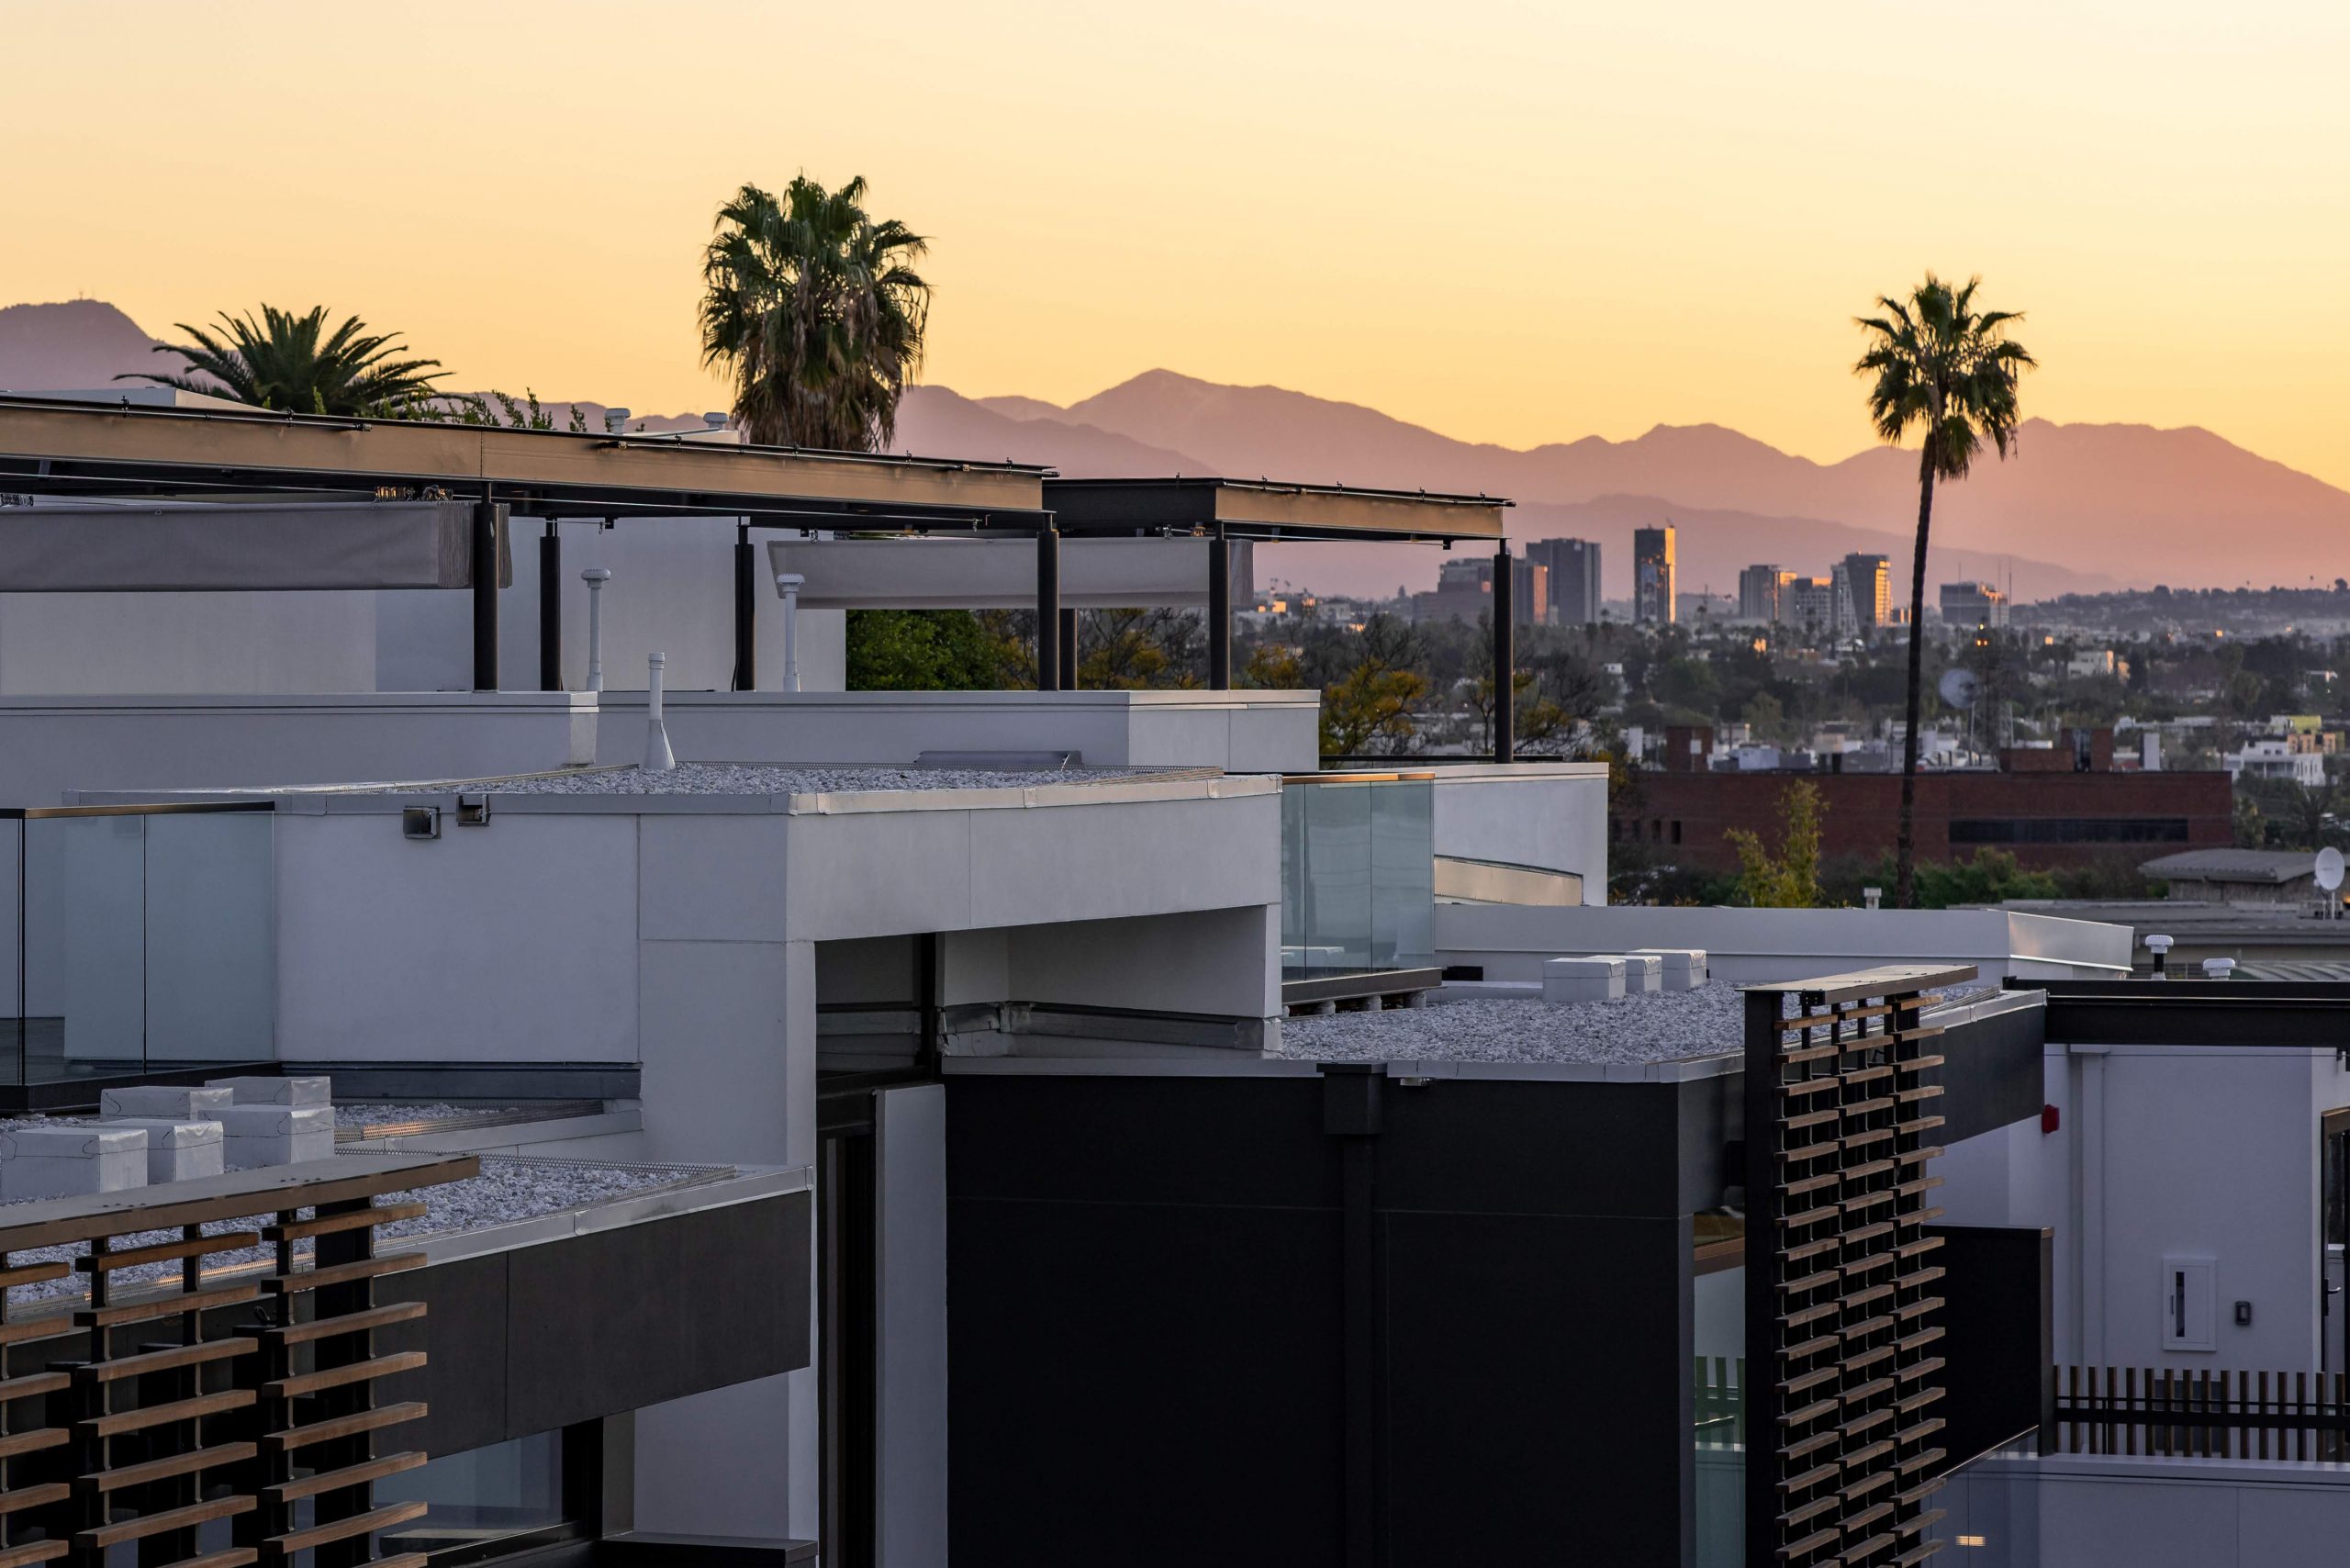 View over the roofs of luxury apartments. Hollywood Hills in the background.